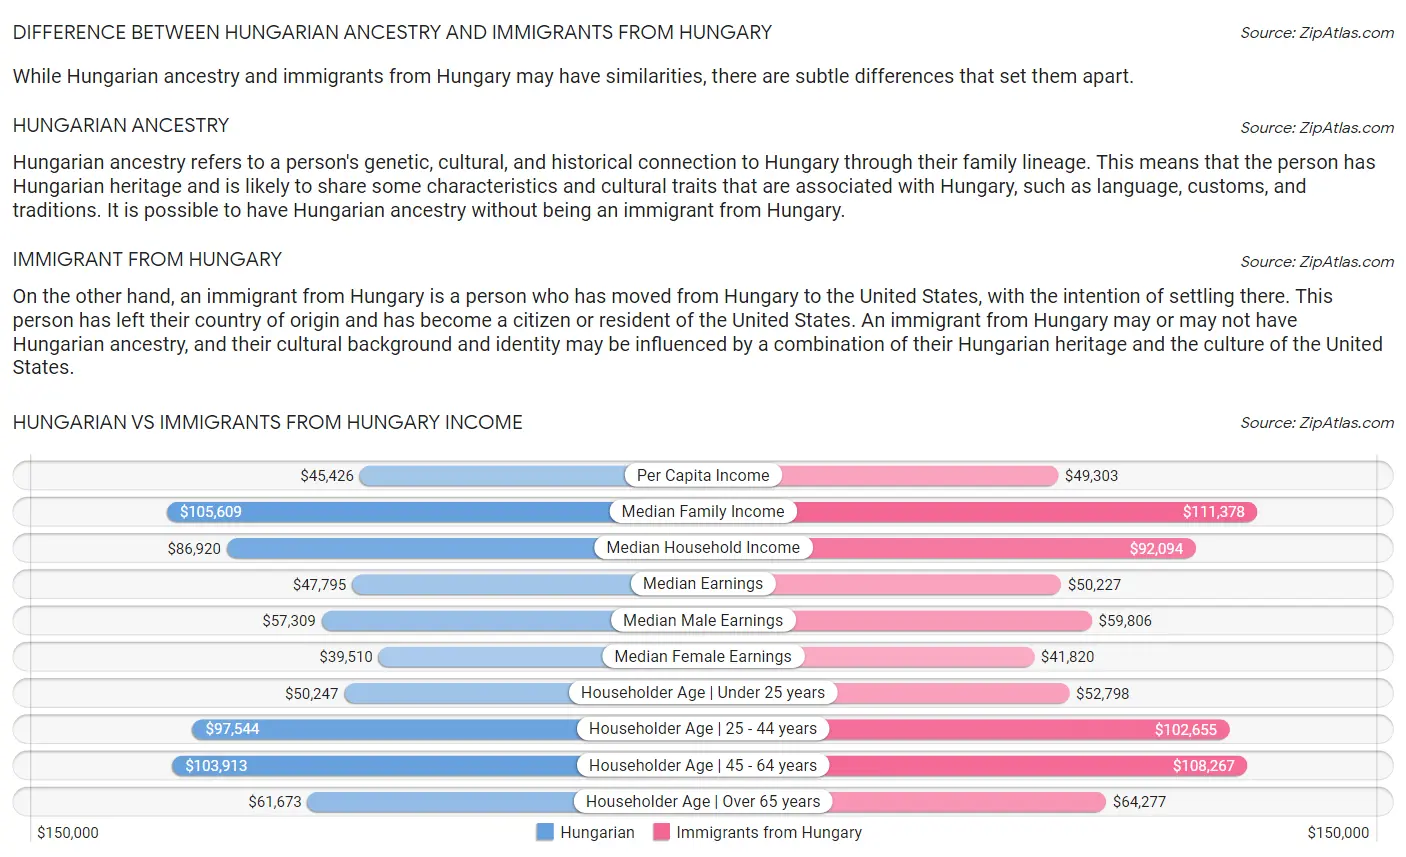 Hungarian vs Immigrants from Hungary Income